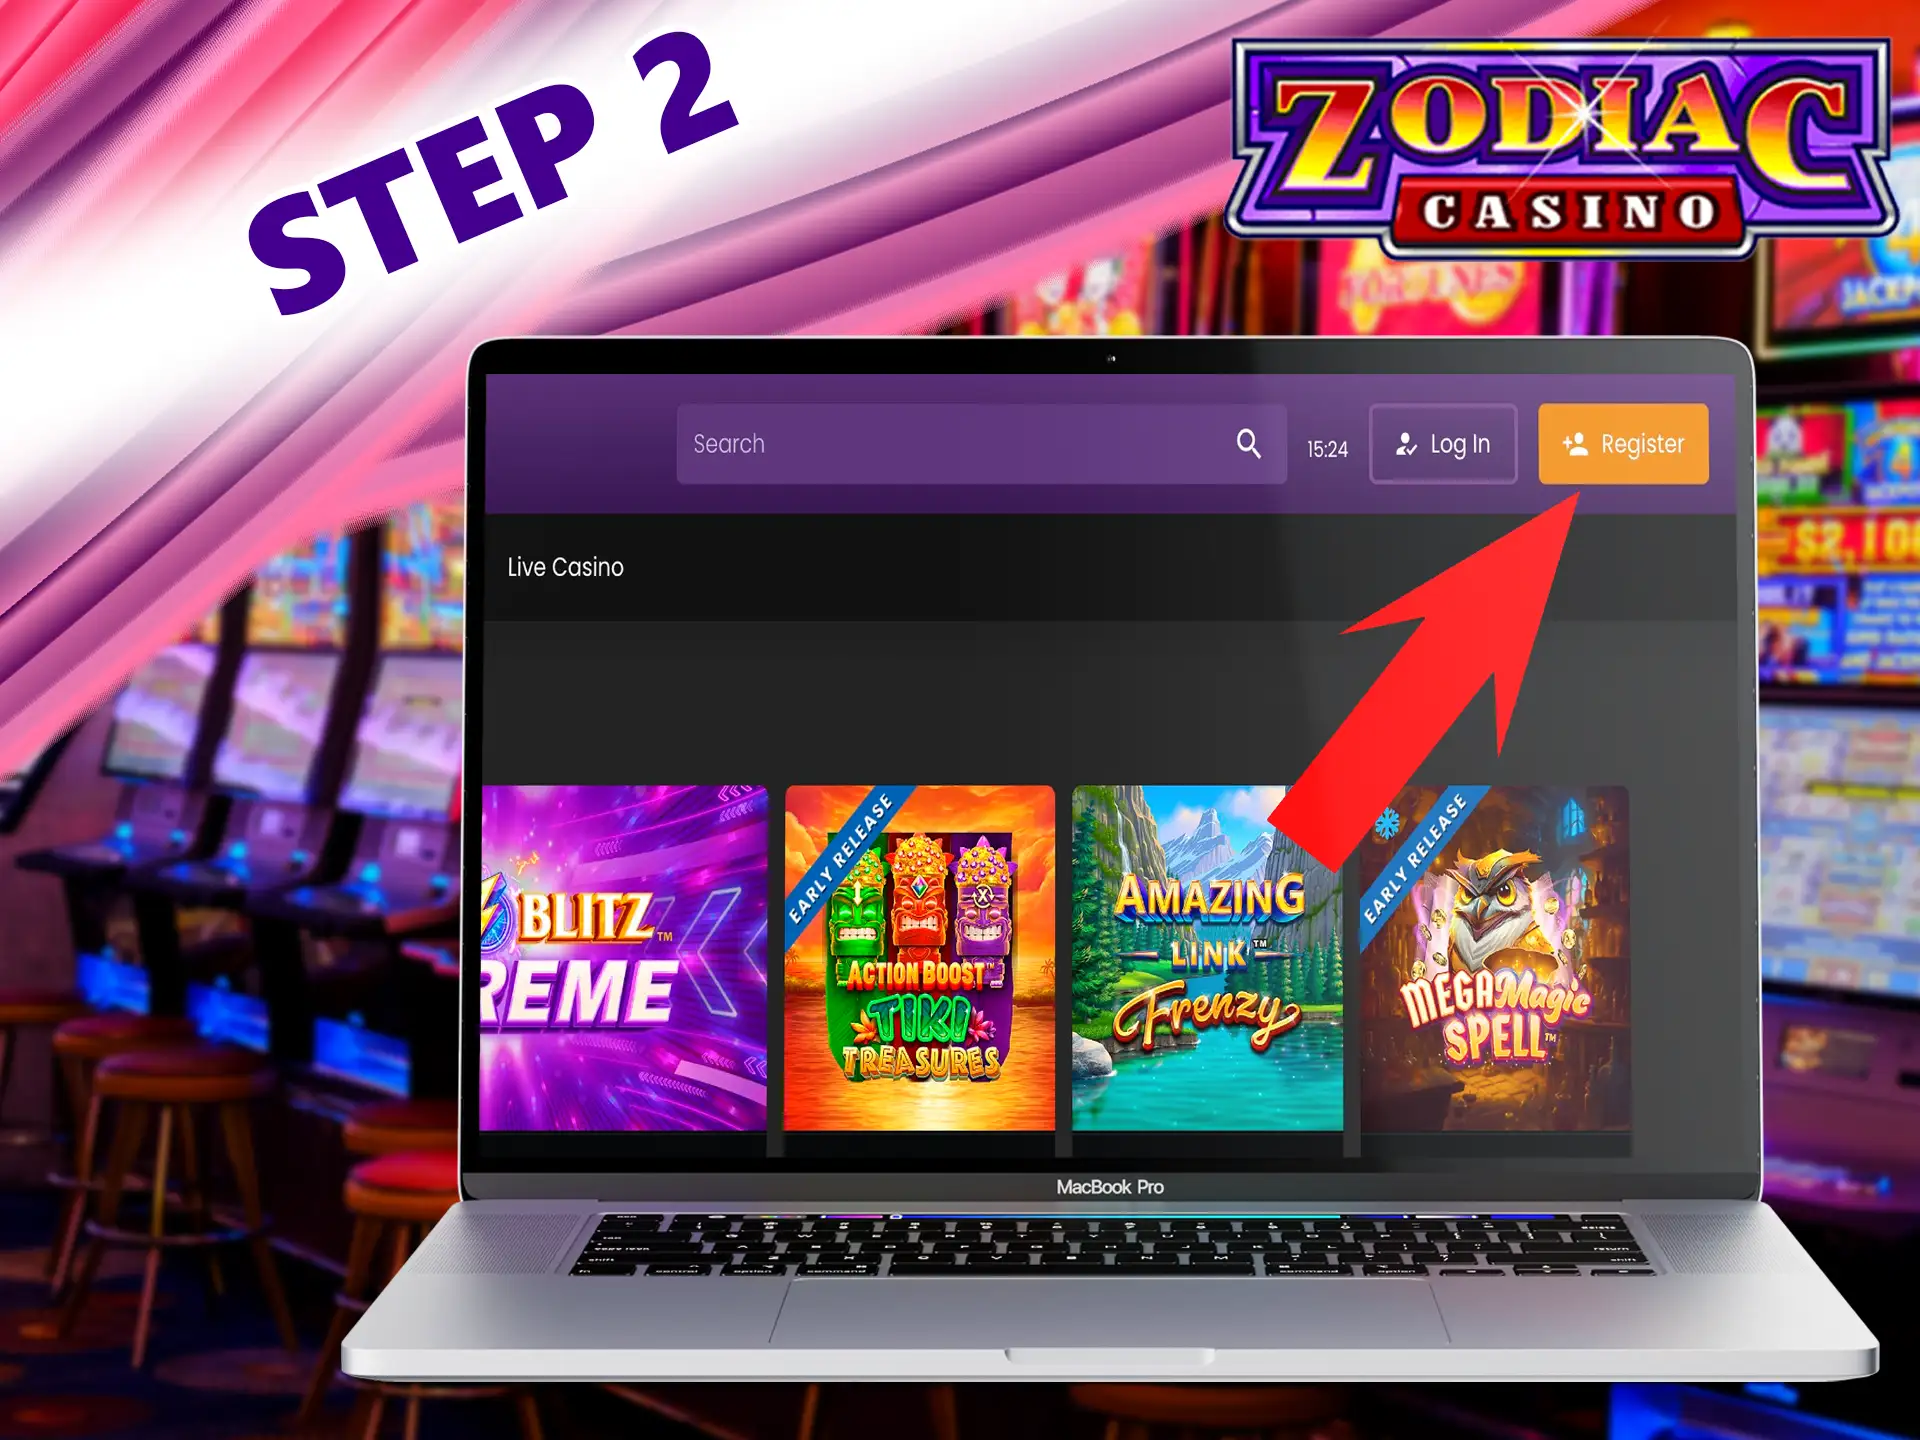 Find the dedicated button at the top of the page and click on it to continue creating an account on the Zodiac Casino platform.